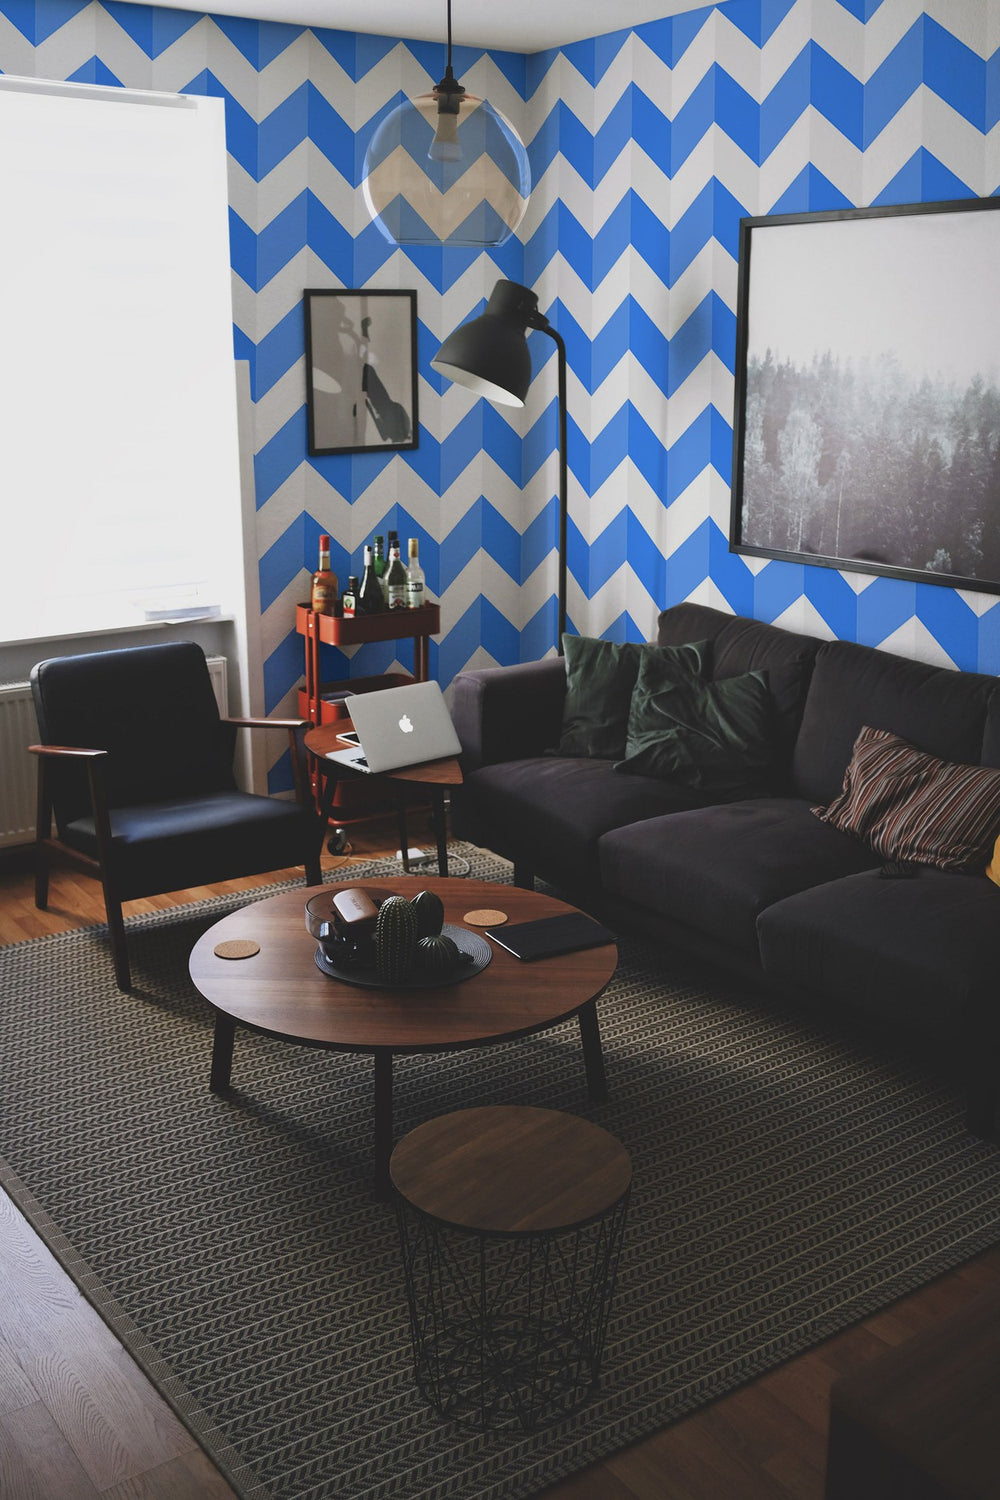 Interior of a modern living room with blue and white chevron pattern wall mural, stylish furniture, and framed artwork.